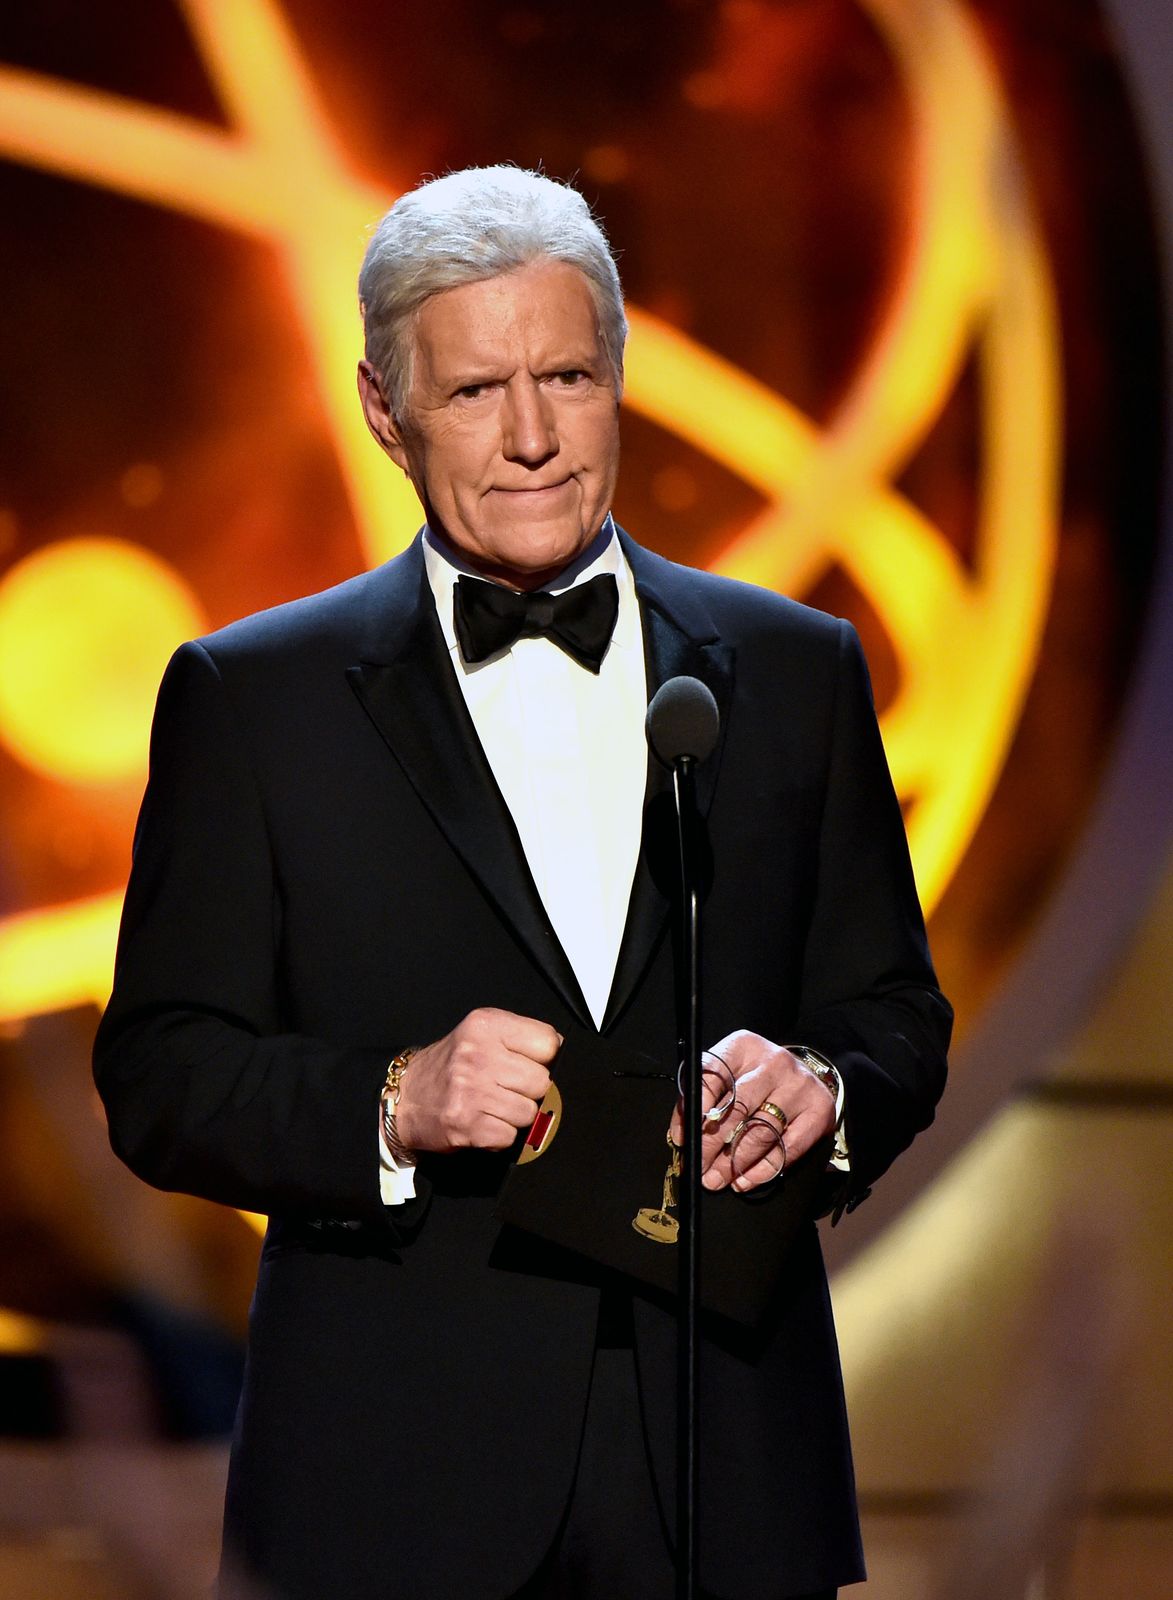 Alex Trebek at the 46th annual Daytime Emmy Awards at Pasadena Civic Center on May 05, 2019 | Photo: Getty Images